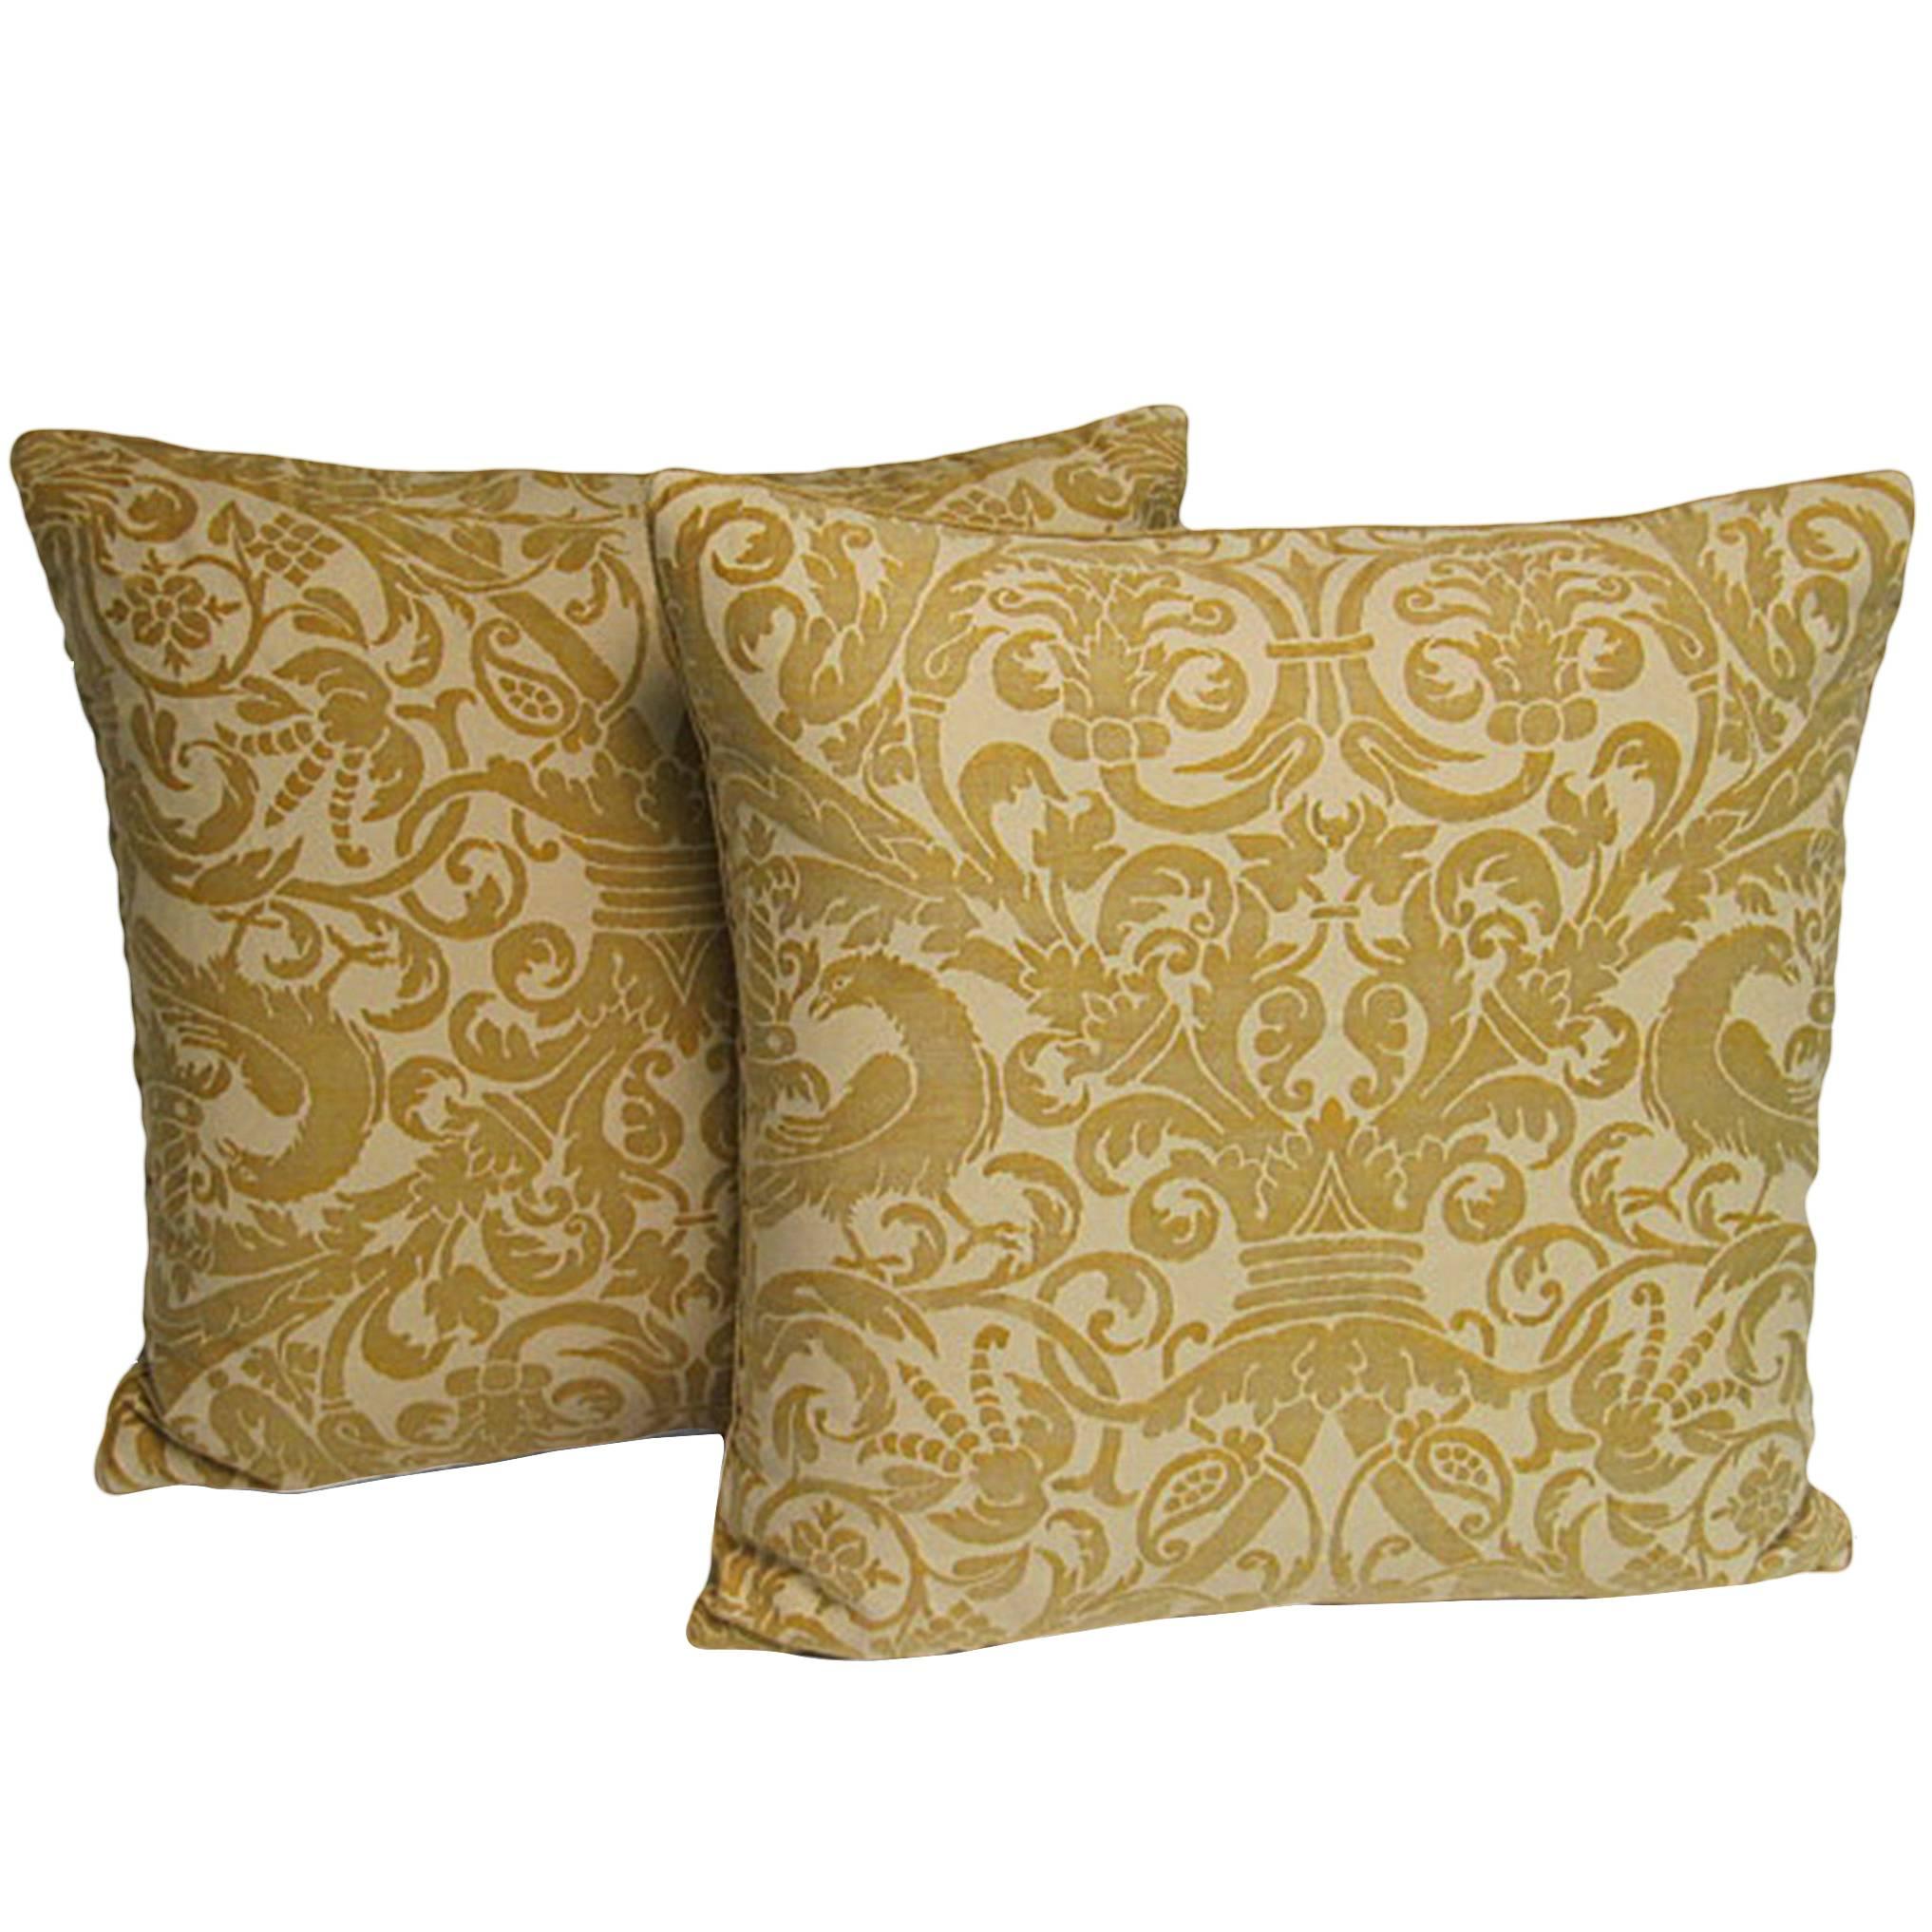 Pair of Handmade Yellow Cotton and Velvet Pillows with a Rope Trim